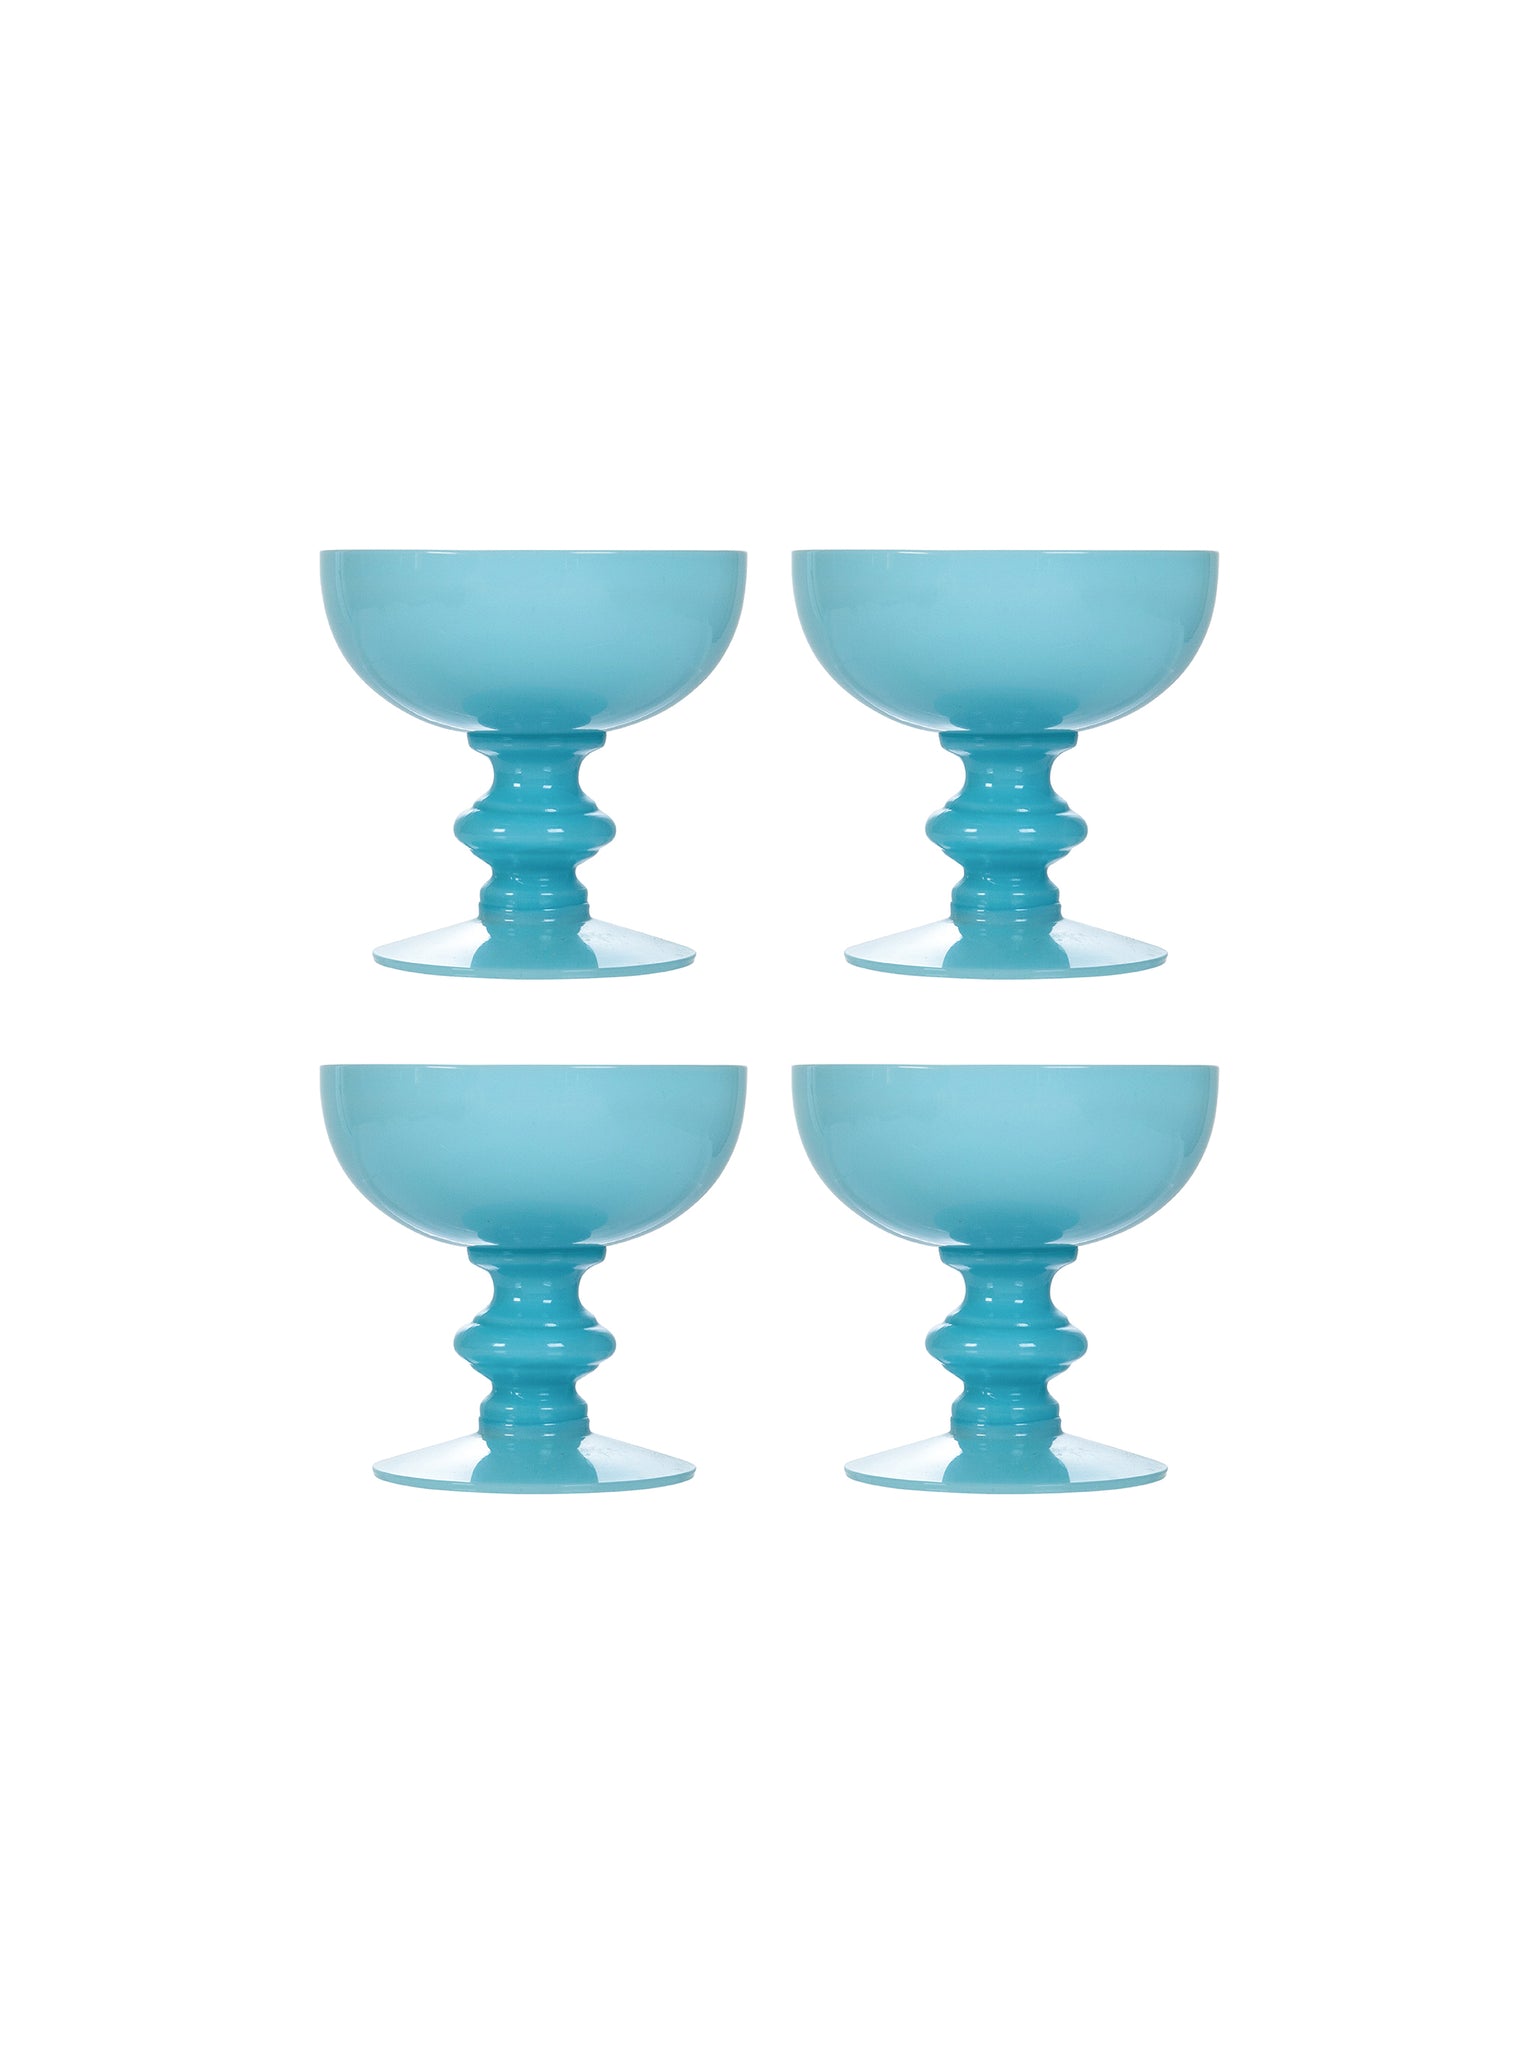 Vintage 1930s Portieux Vallerysthal Opaline Coupes Set of 4 Weston Table